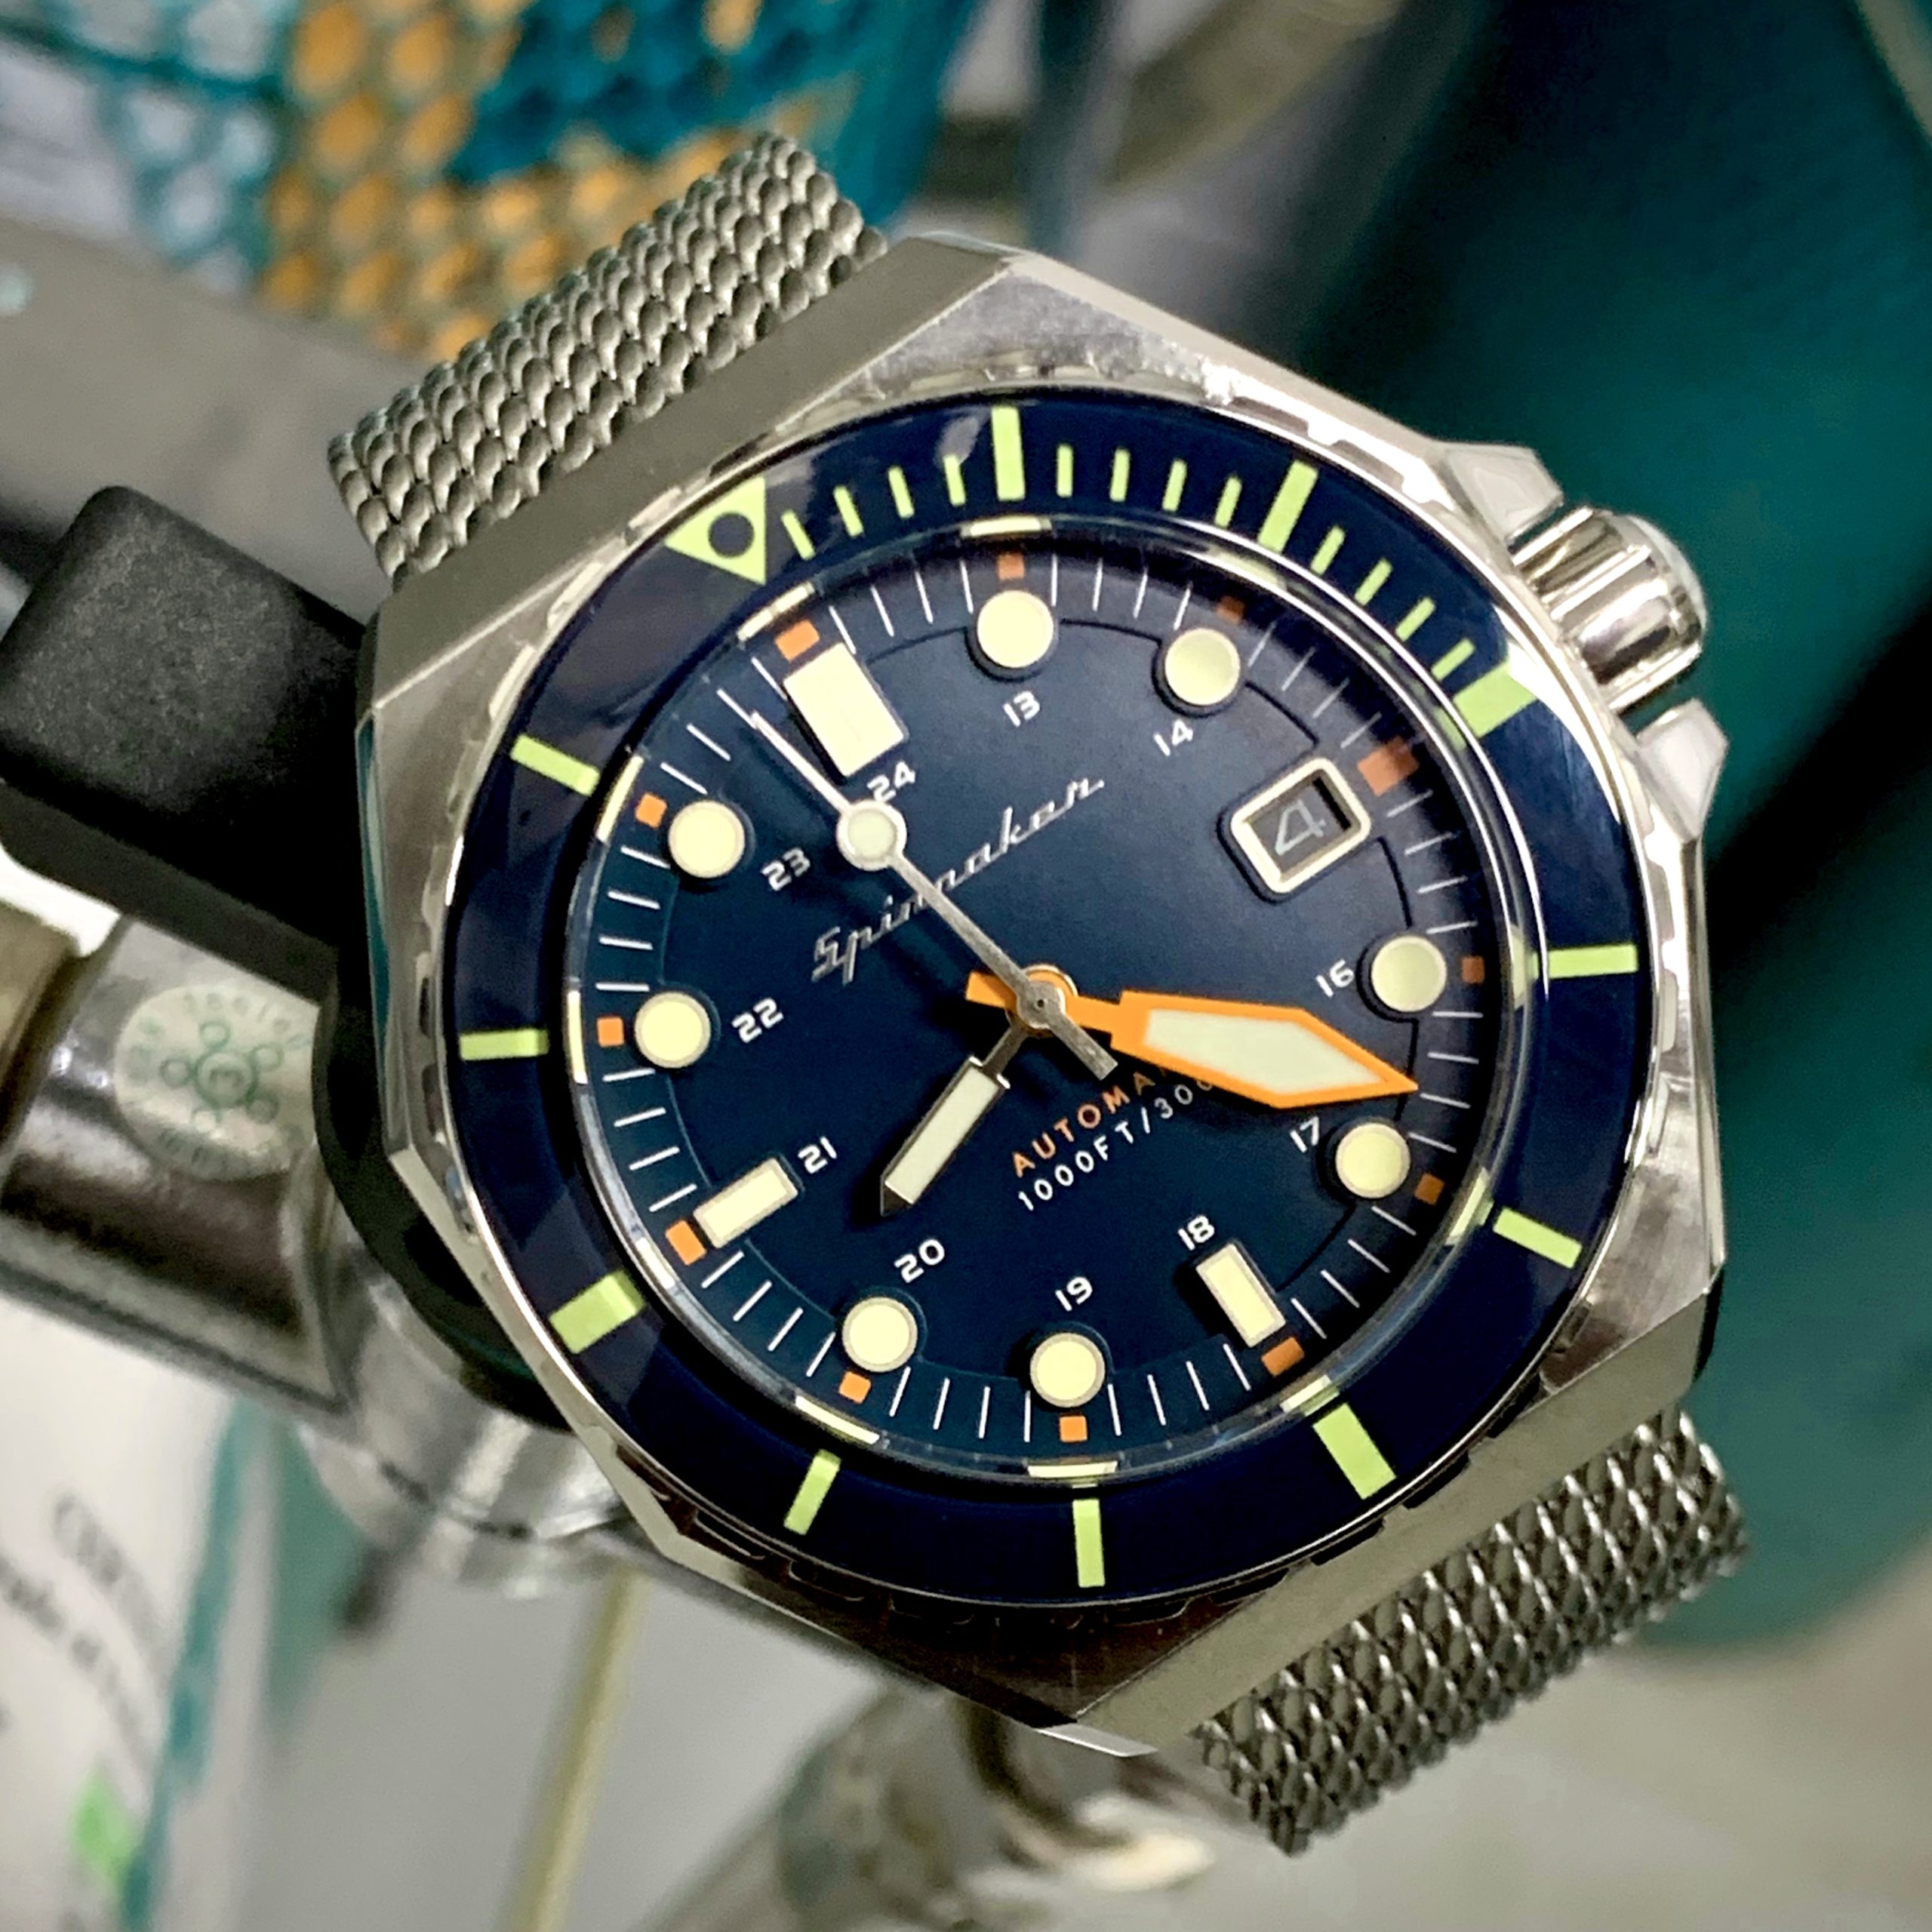 REVIEW: Spinnaker Dumas - Automatic Diver Watch Review